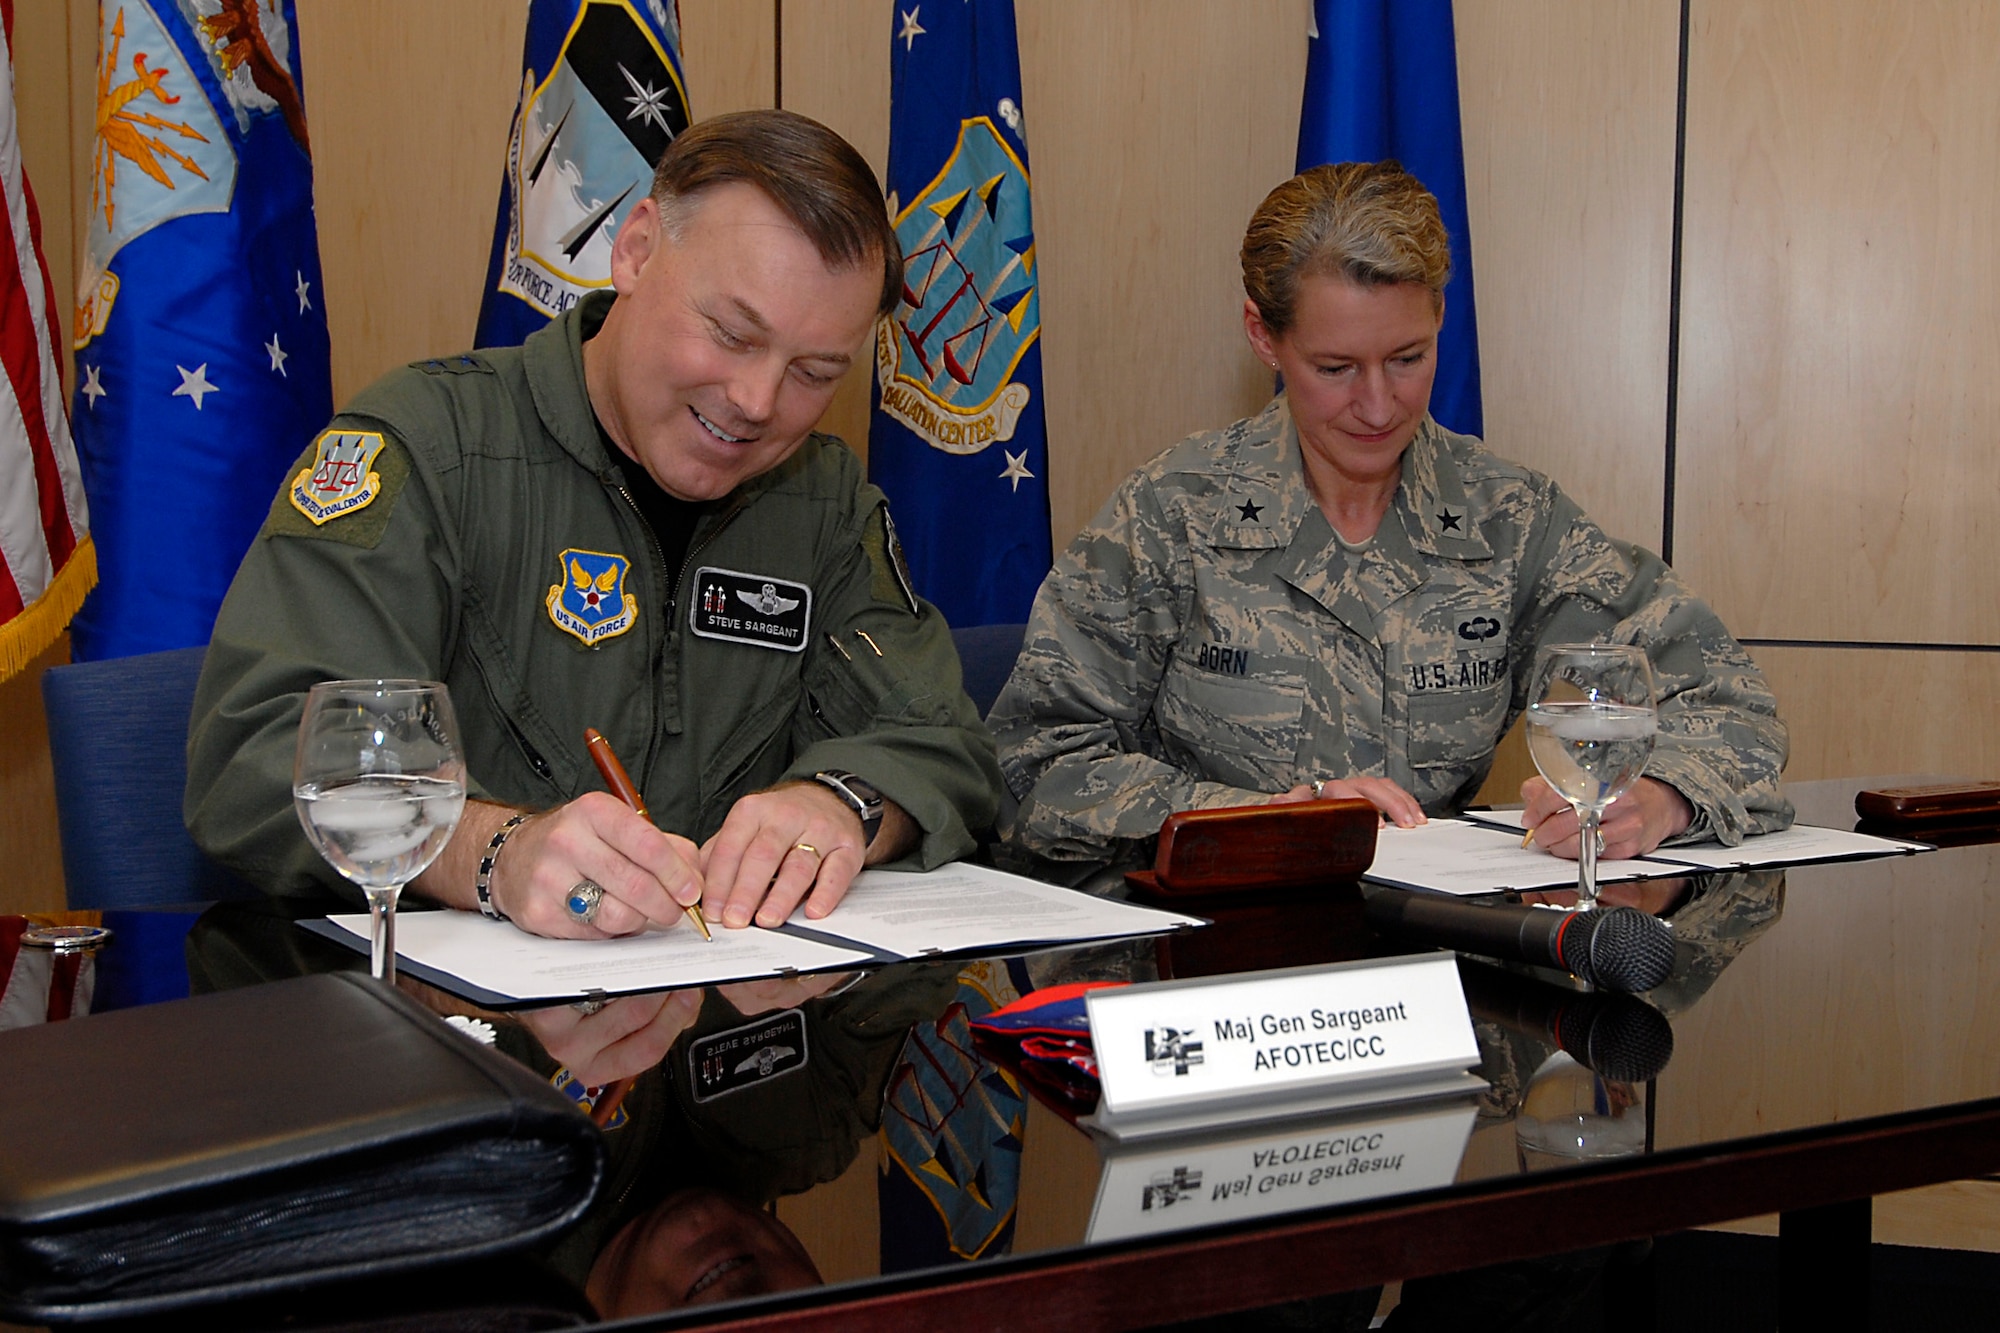 (From left) Maj. Gen. Stephen T. Sargeant, Air Force Operational Test and Evaluation Center Commander and Brig. Gen. Dana Born, U.S. Air Force Academy Dean of Faculty, sign a memorandum of agreement creating a mentoring program between AFOTEC and the USAFA during a formal signing ceremony at the Academy in Colorado Springs, Colo., on March 17, 2008.